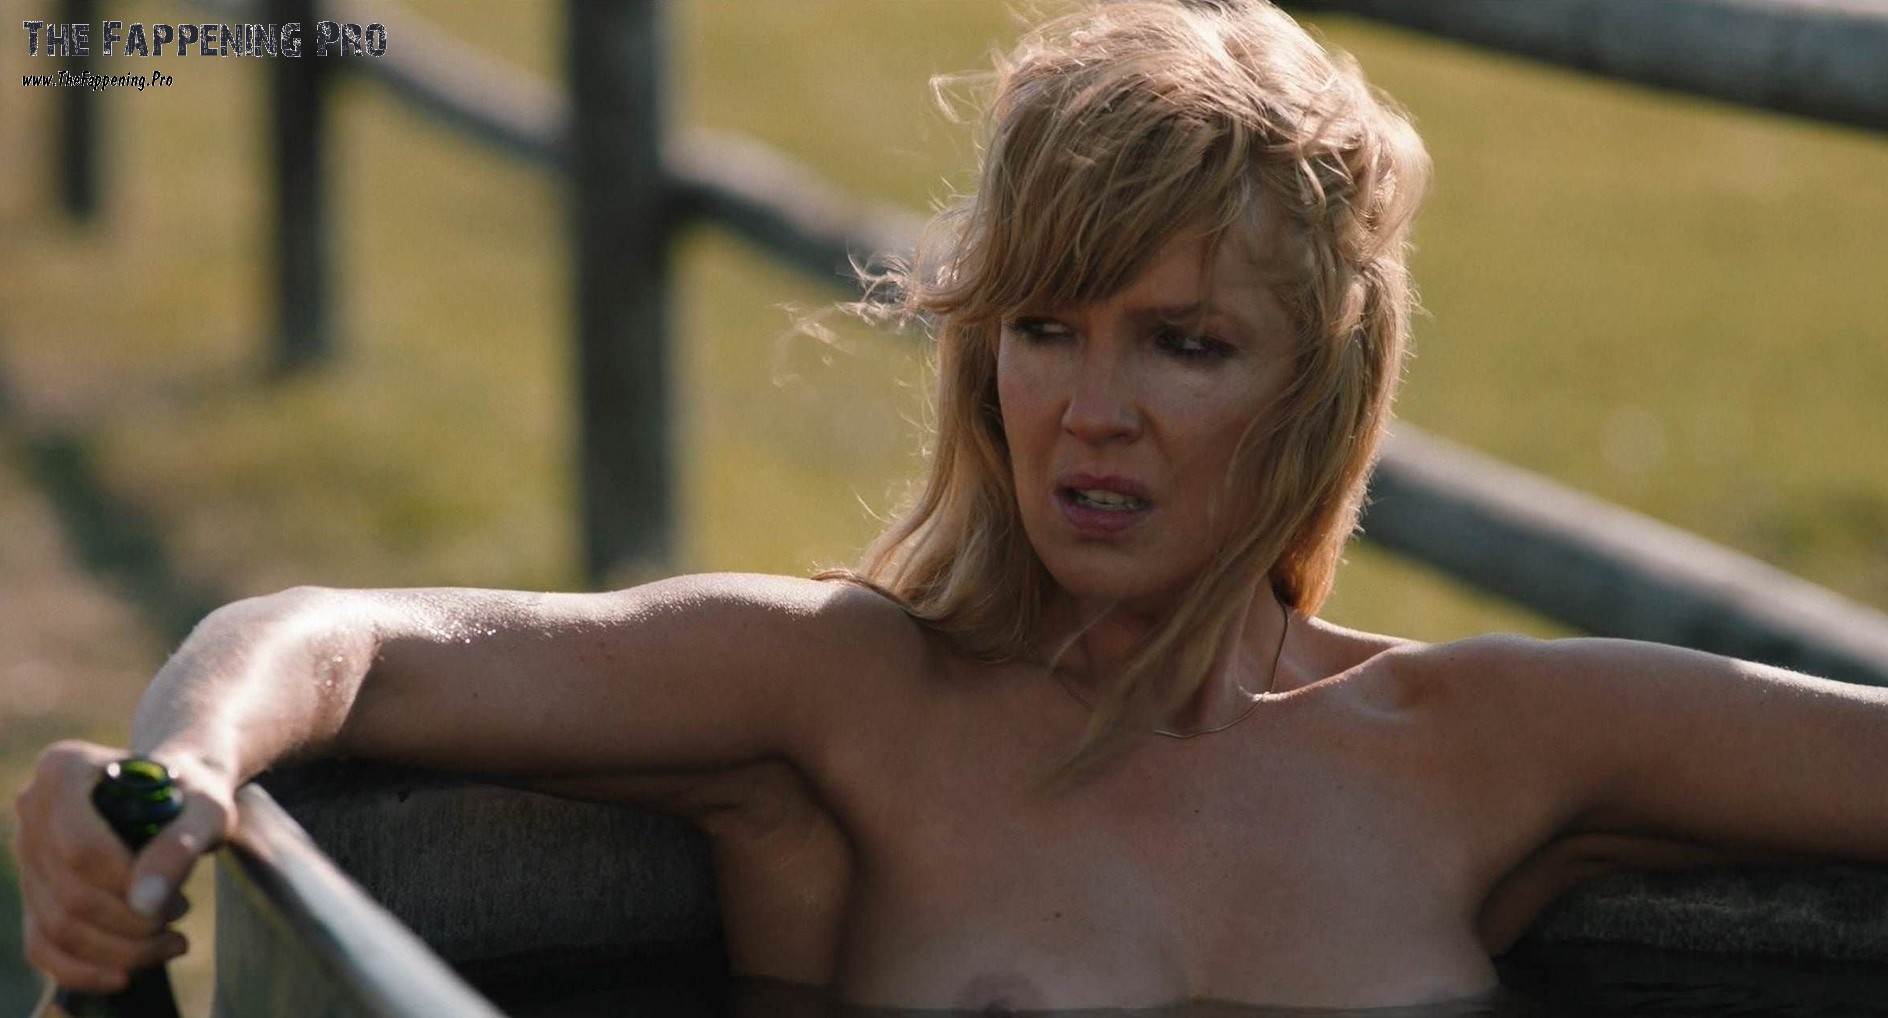 Kelly Reilly Tits TheFappening.Pro 2 - Kelly Reilly Naked (30 Photos)